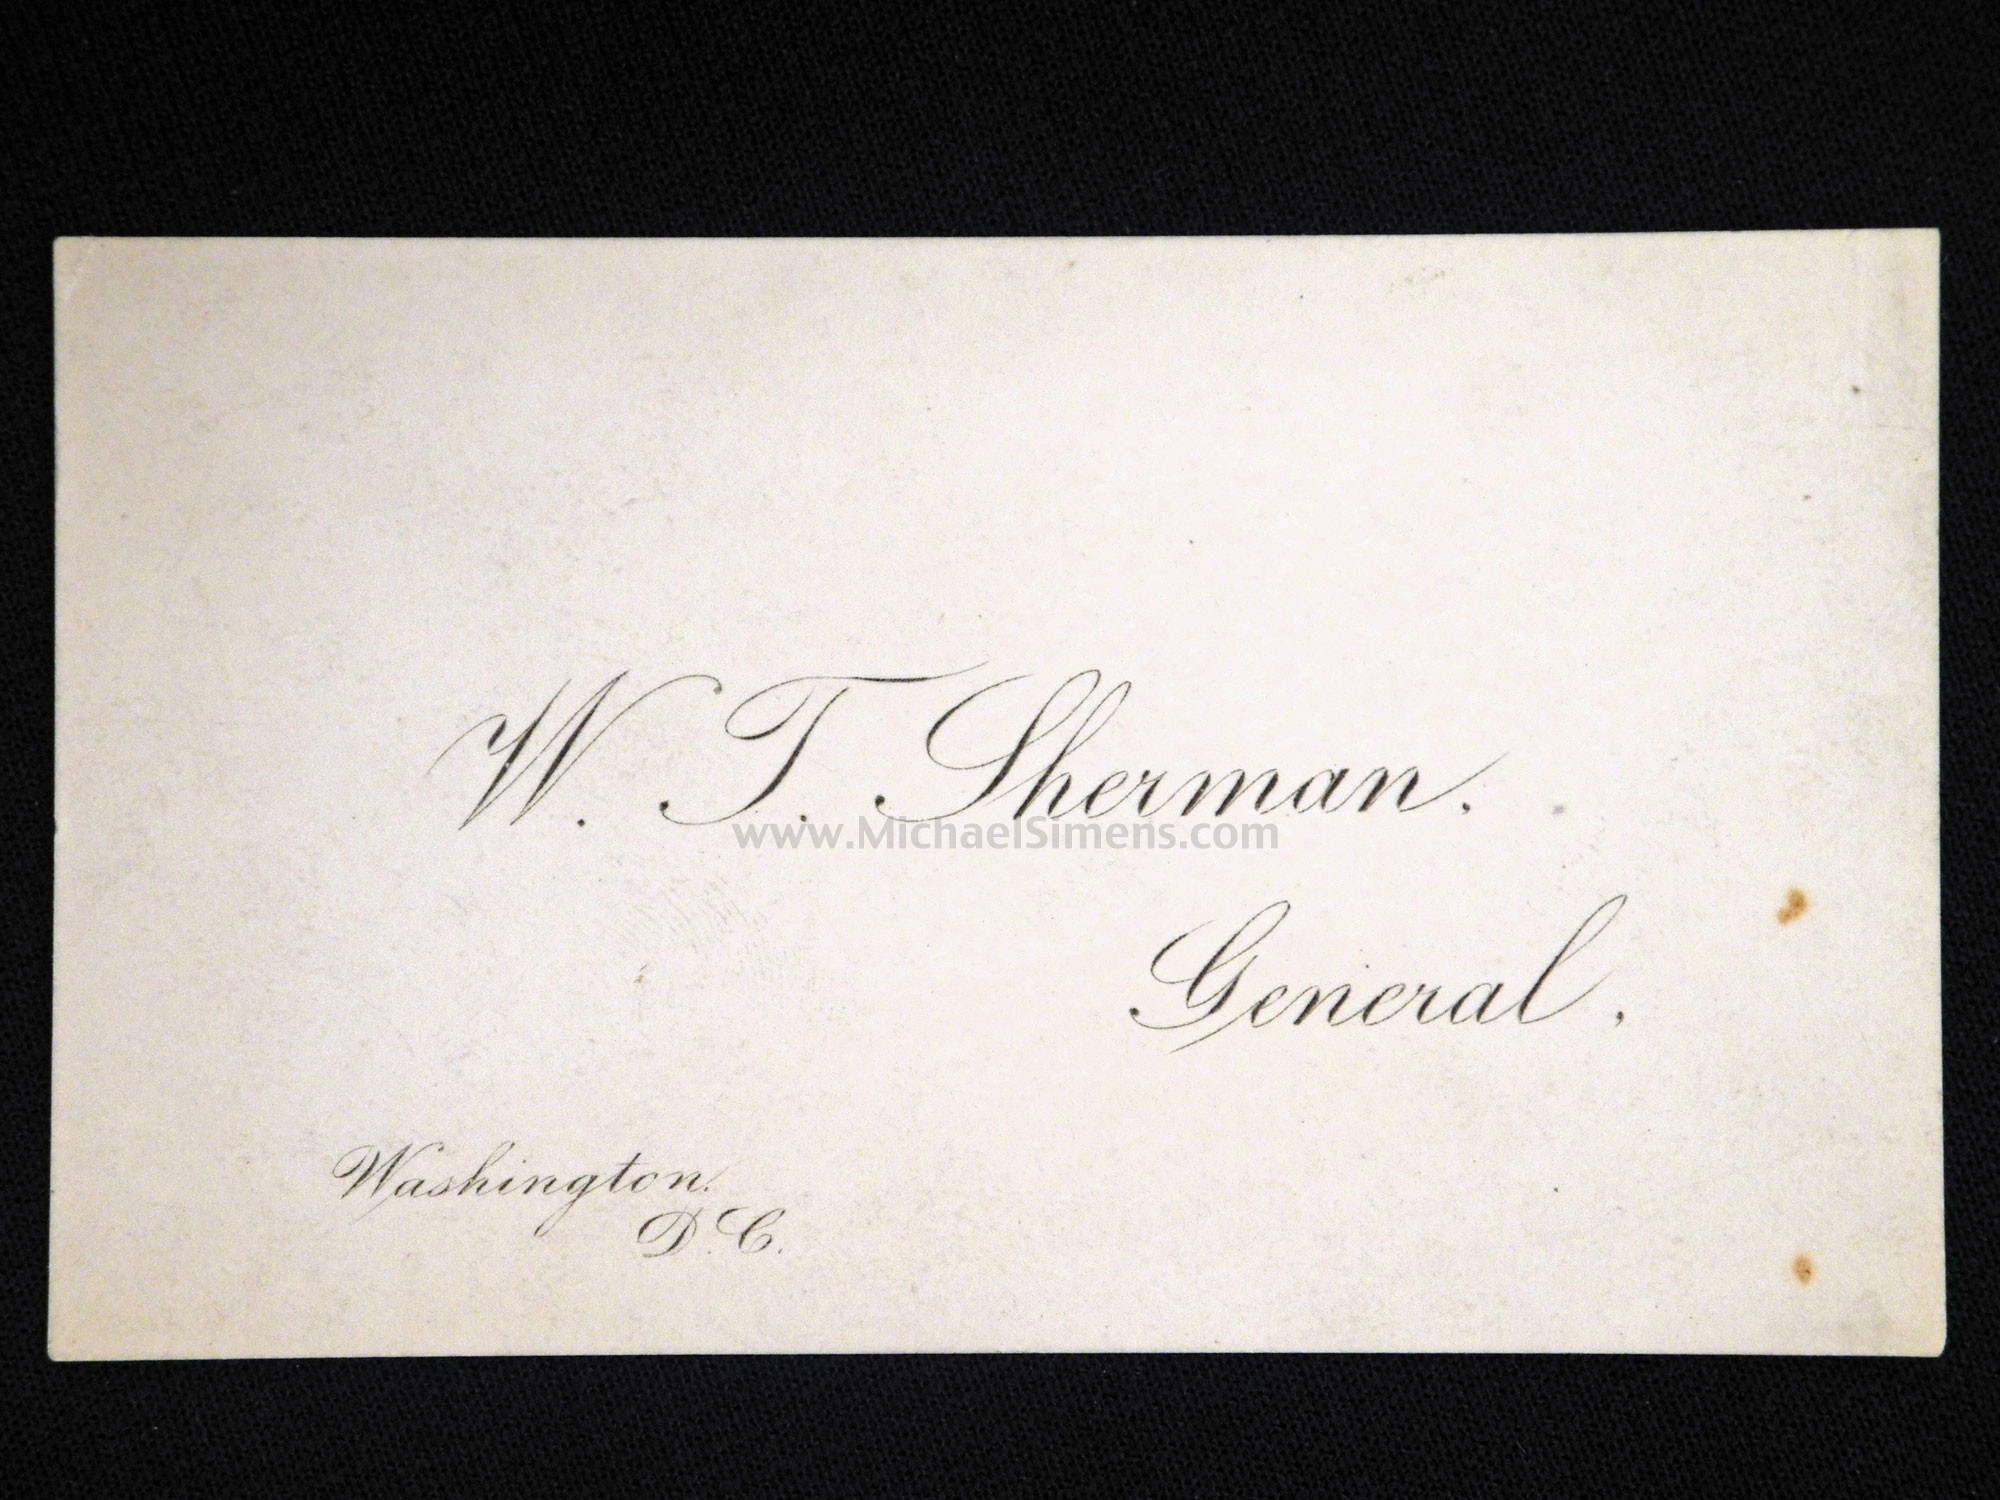 GENERAL SHERMAN BUSINESS CARD WITH A. S. WEBB SIGNATURE ON VERSO